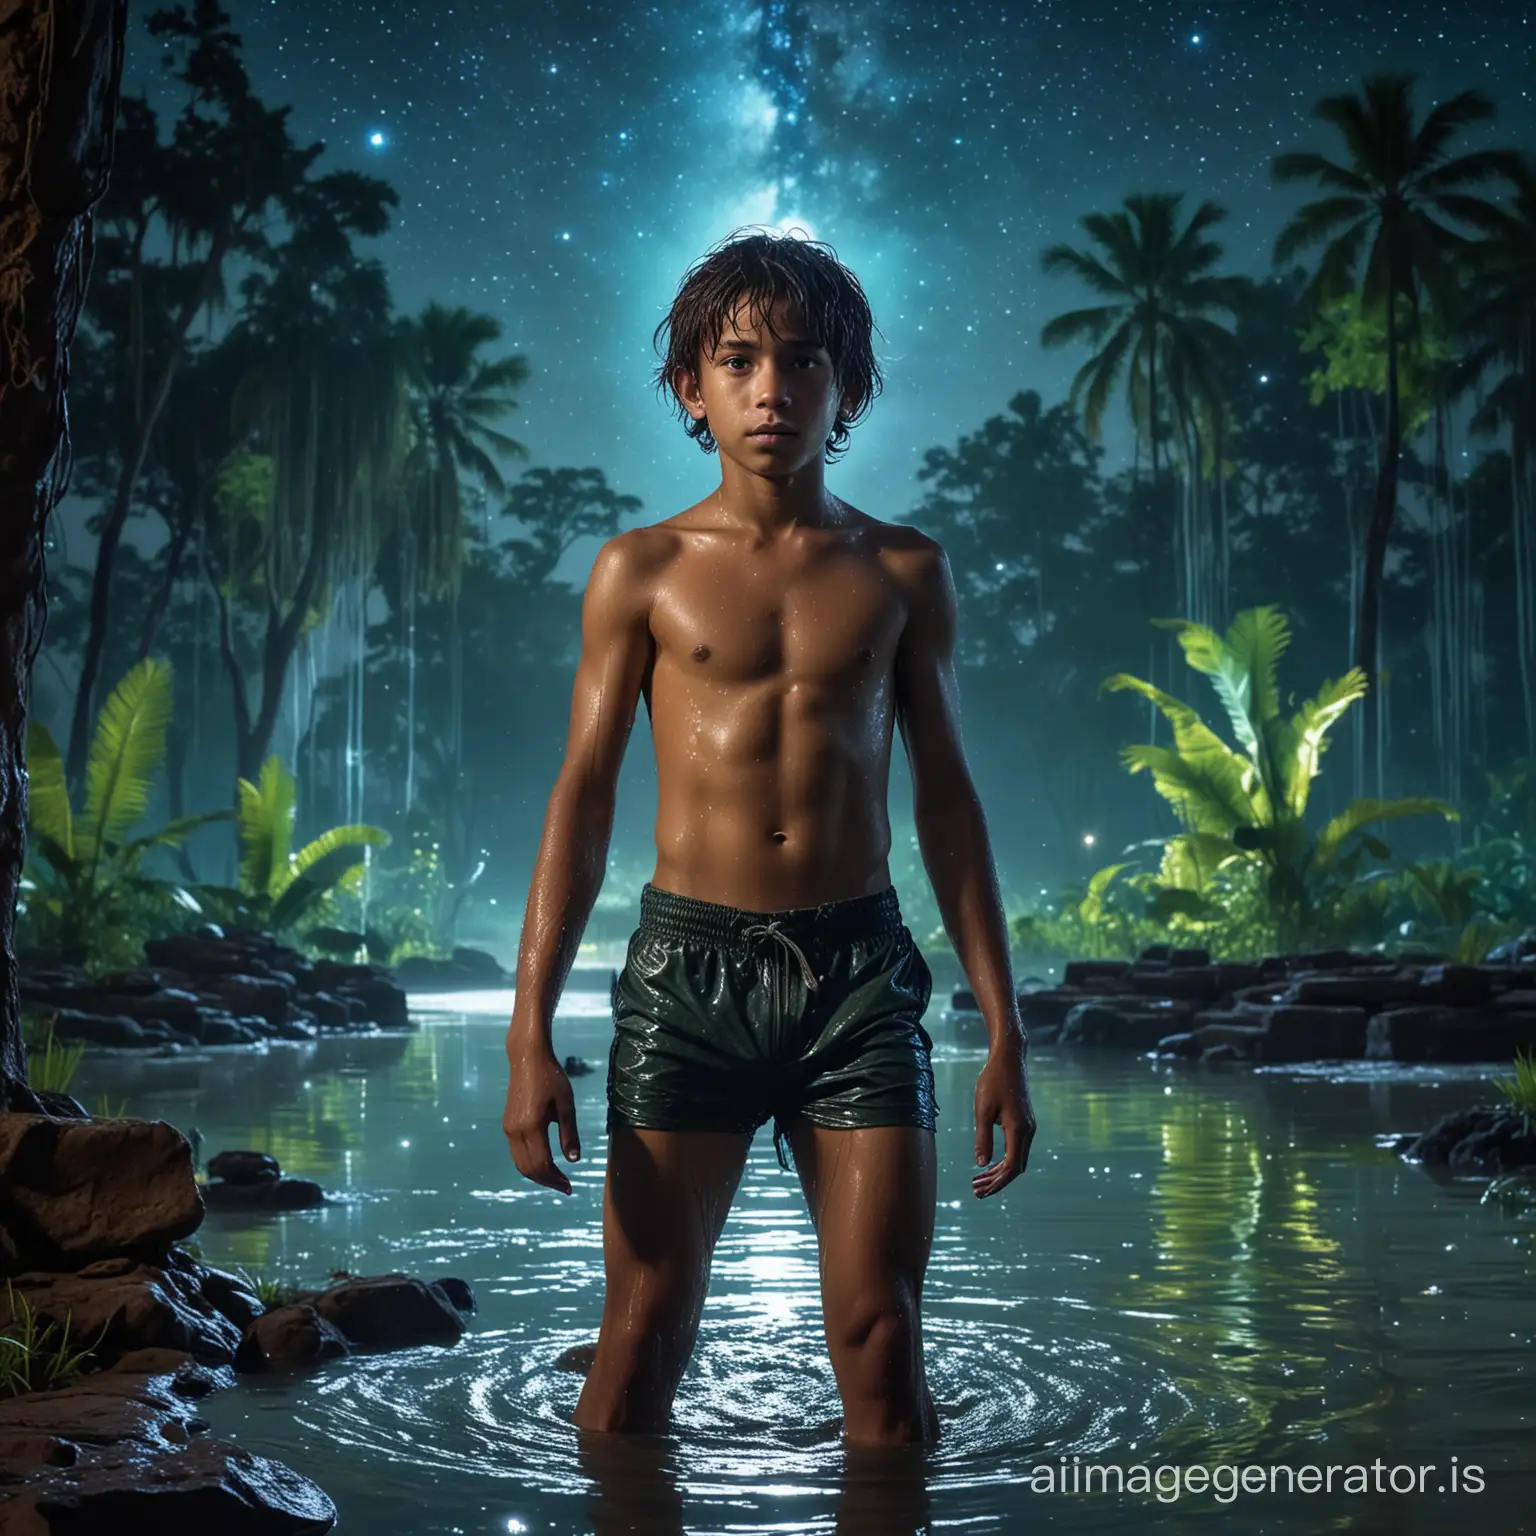 Muscular-Mowgli-by-Jungle-Oasis-Athletic-Boy-Amid-Cambodian-Temple-Ruins-at-Night